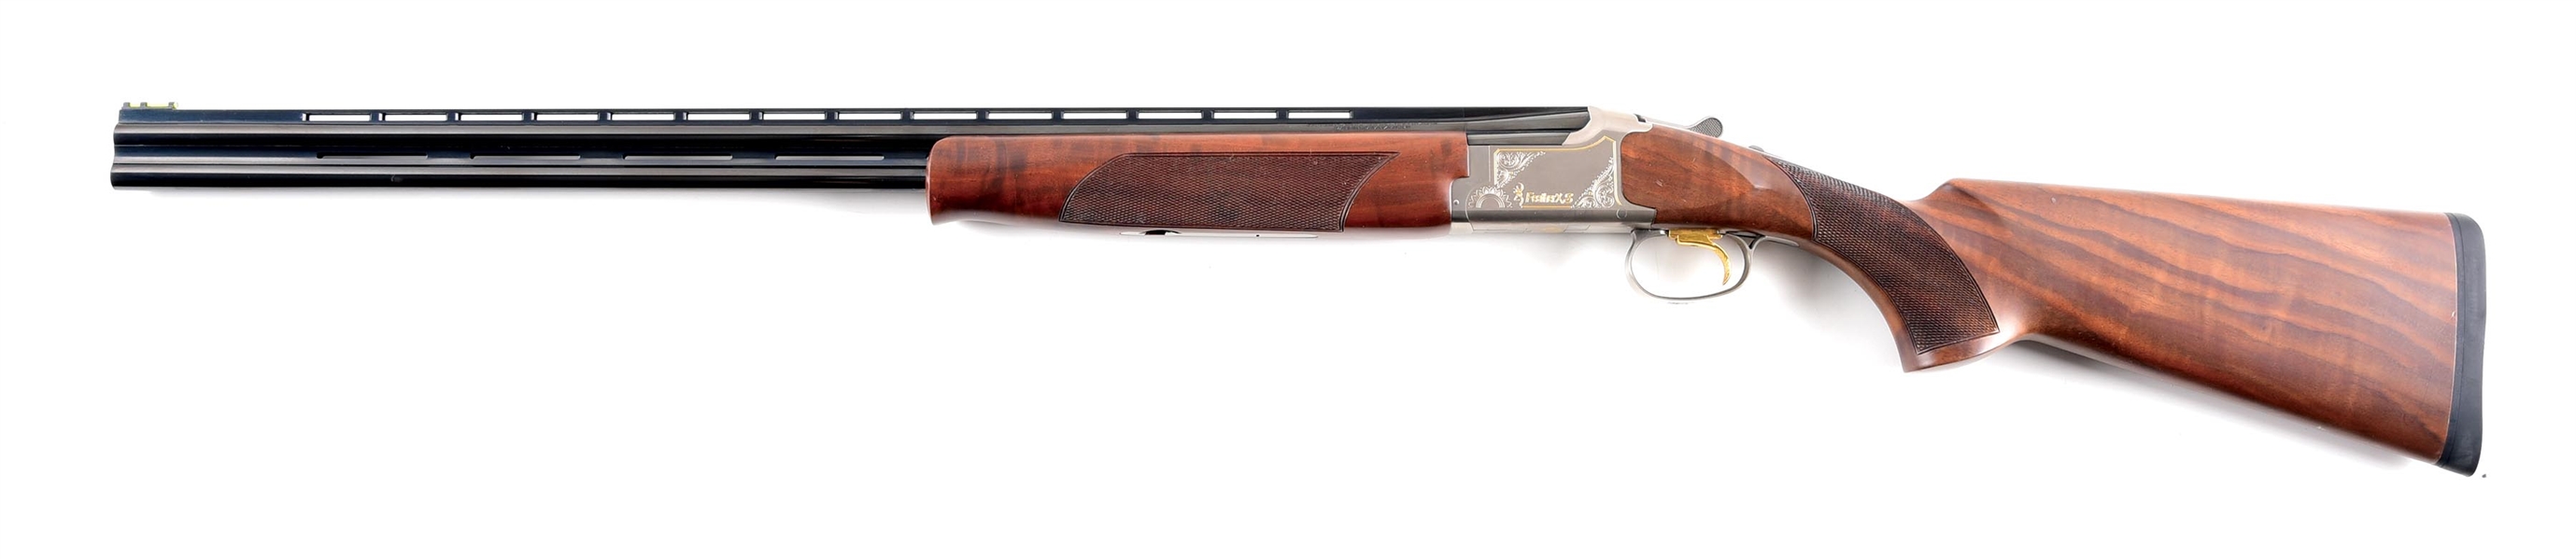 (M) BROWNING FEATHER XS OVER-UNDER SHOTGUN.